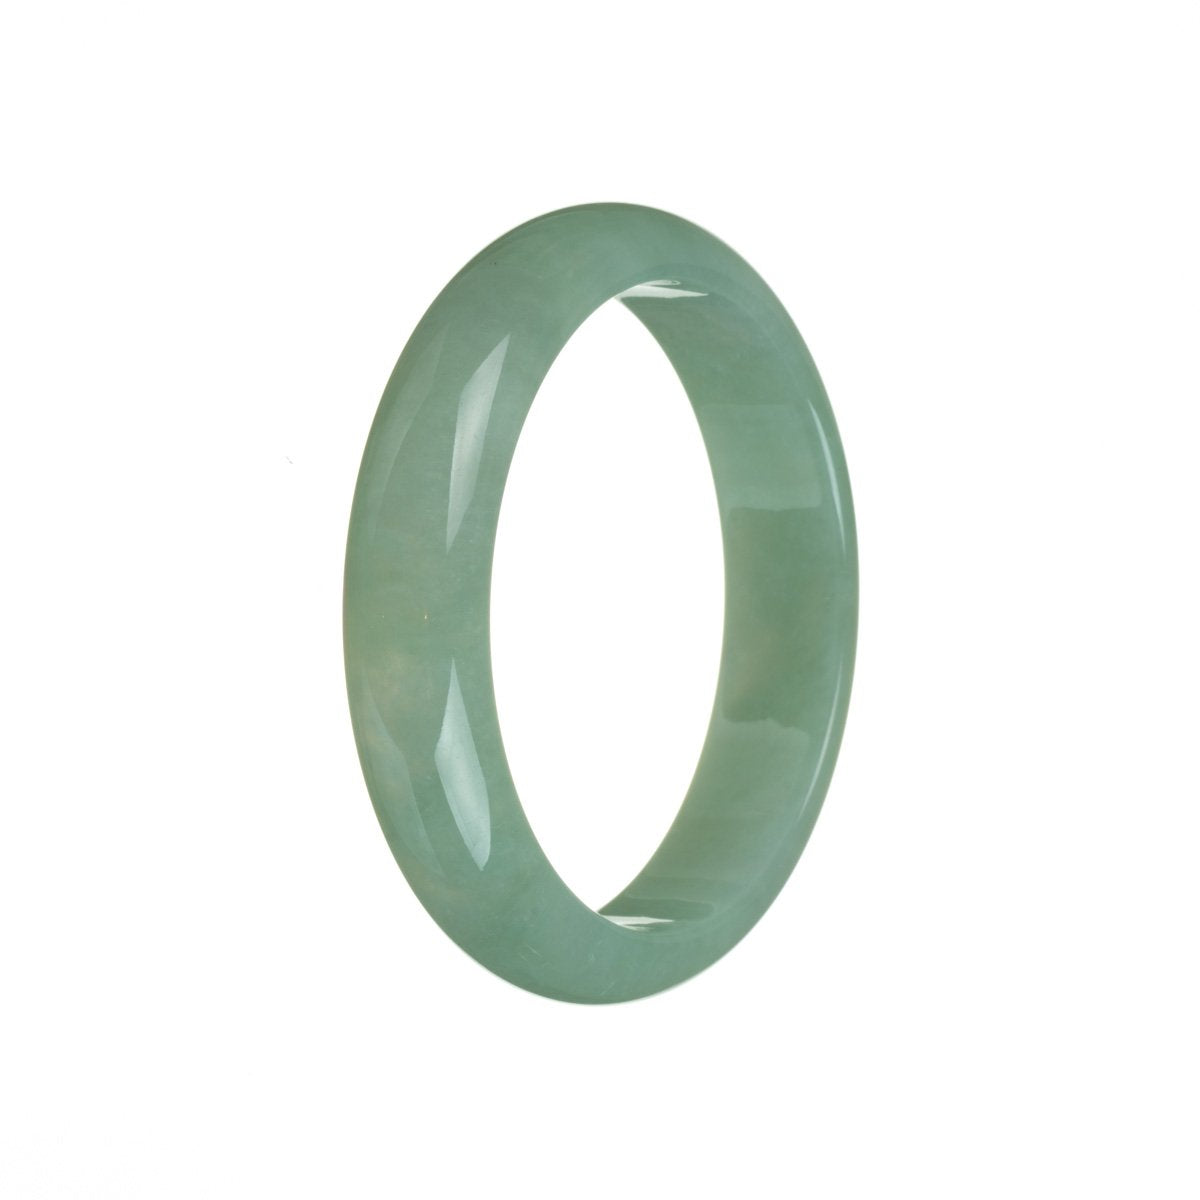 A close-up image of a genuine Type A green traditional jade bracelet. The bracelet is 58mm in size and has a semi-round shape. It is being sold by MAYS GEMS.